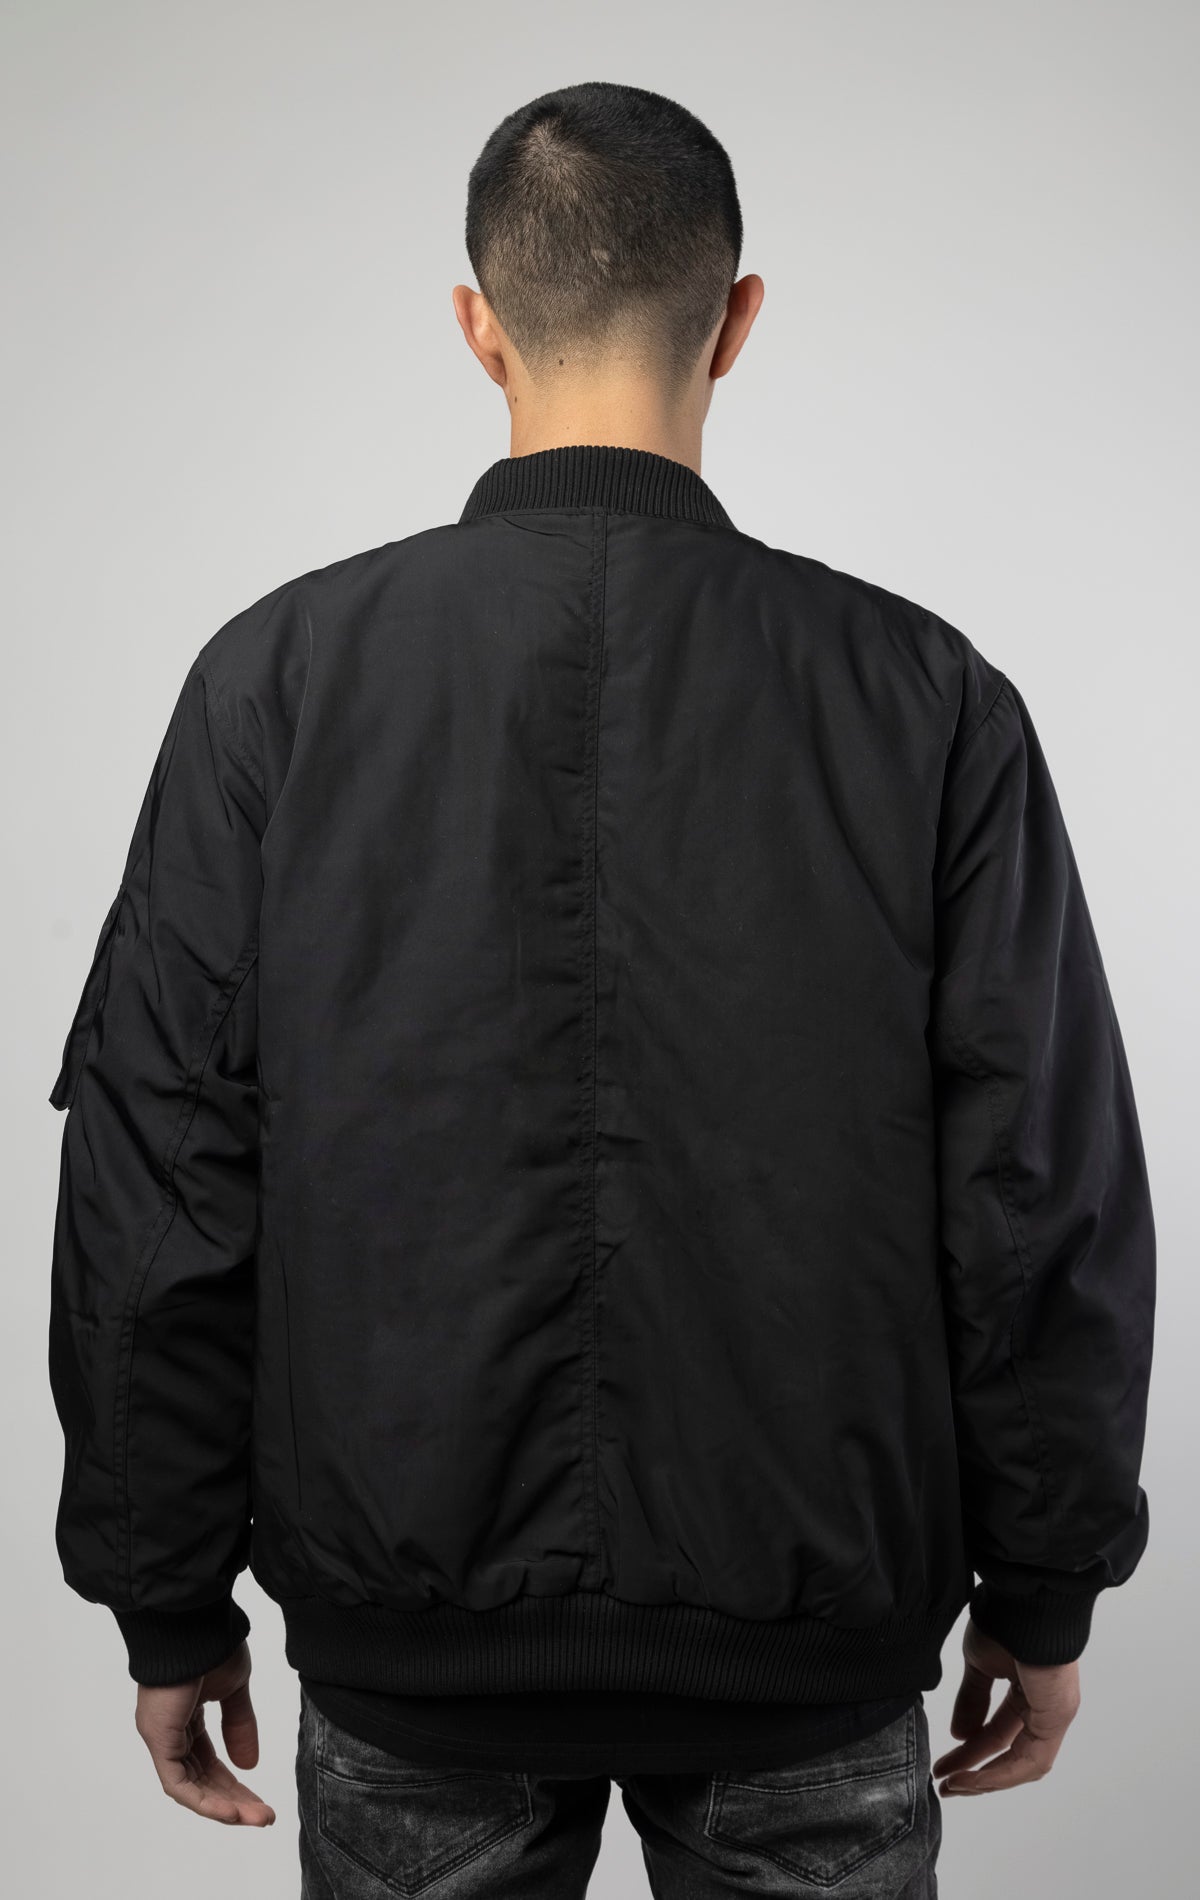 Men's utility bomber jacket with 5 pockets on the front (Velcro, zip, and snap closure), ribbed collar and cuffs, as well as a sleeve pocket 